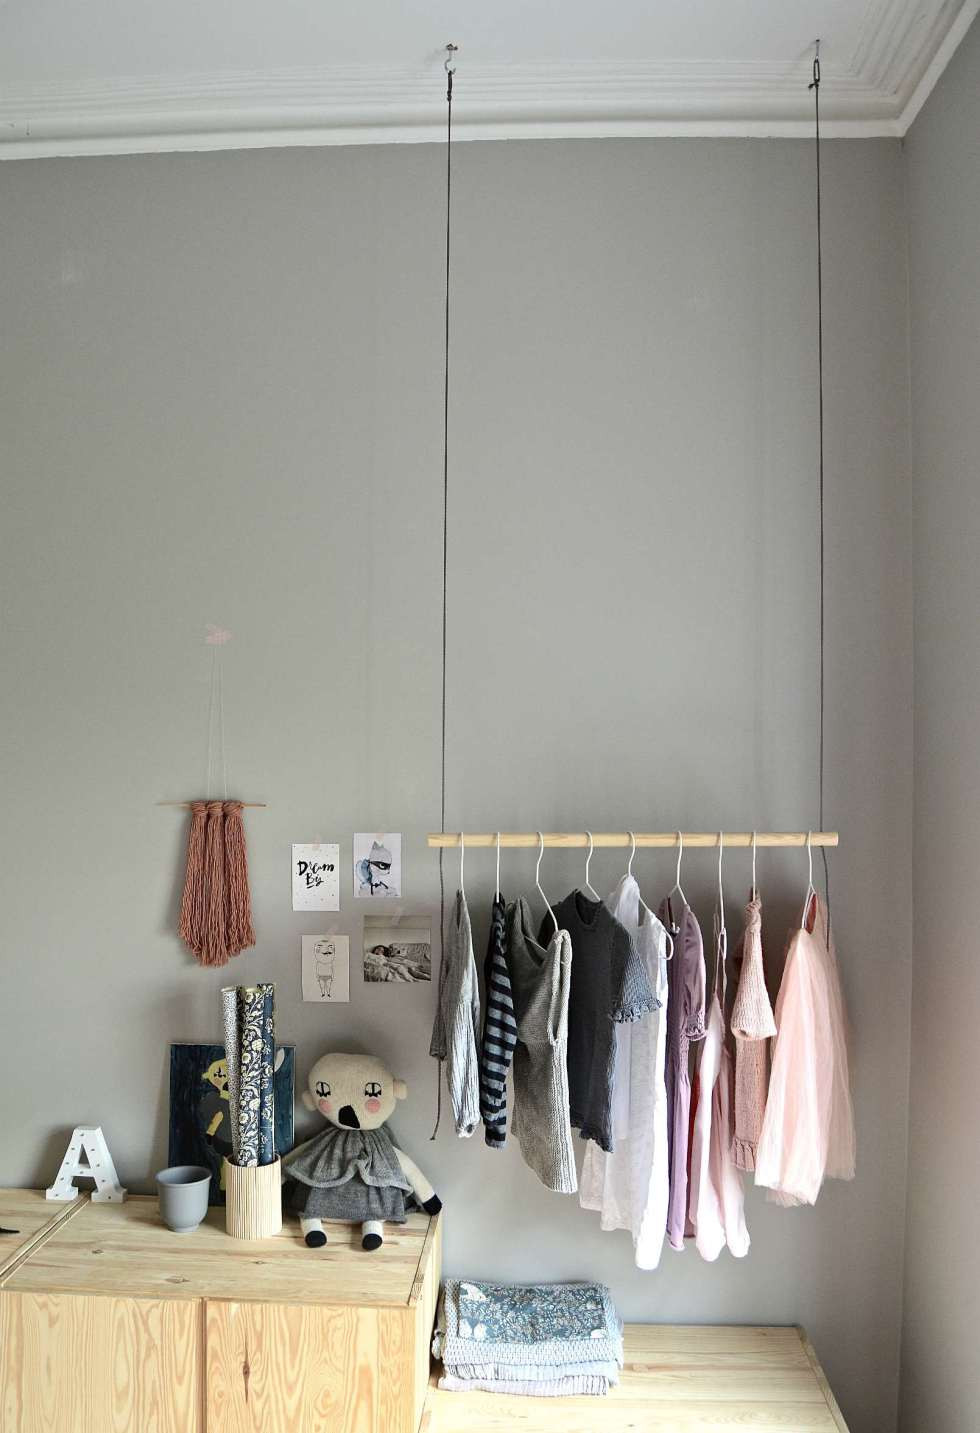 DIY Hanging Clothes Rack From Ceiling
 Hang on With this DIY hanging clothes rack DIY home